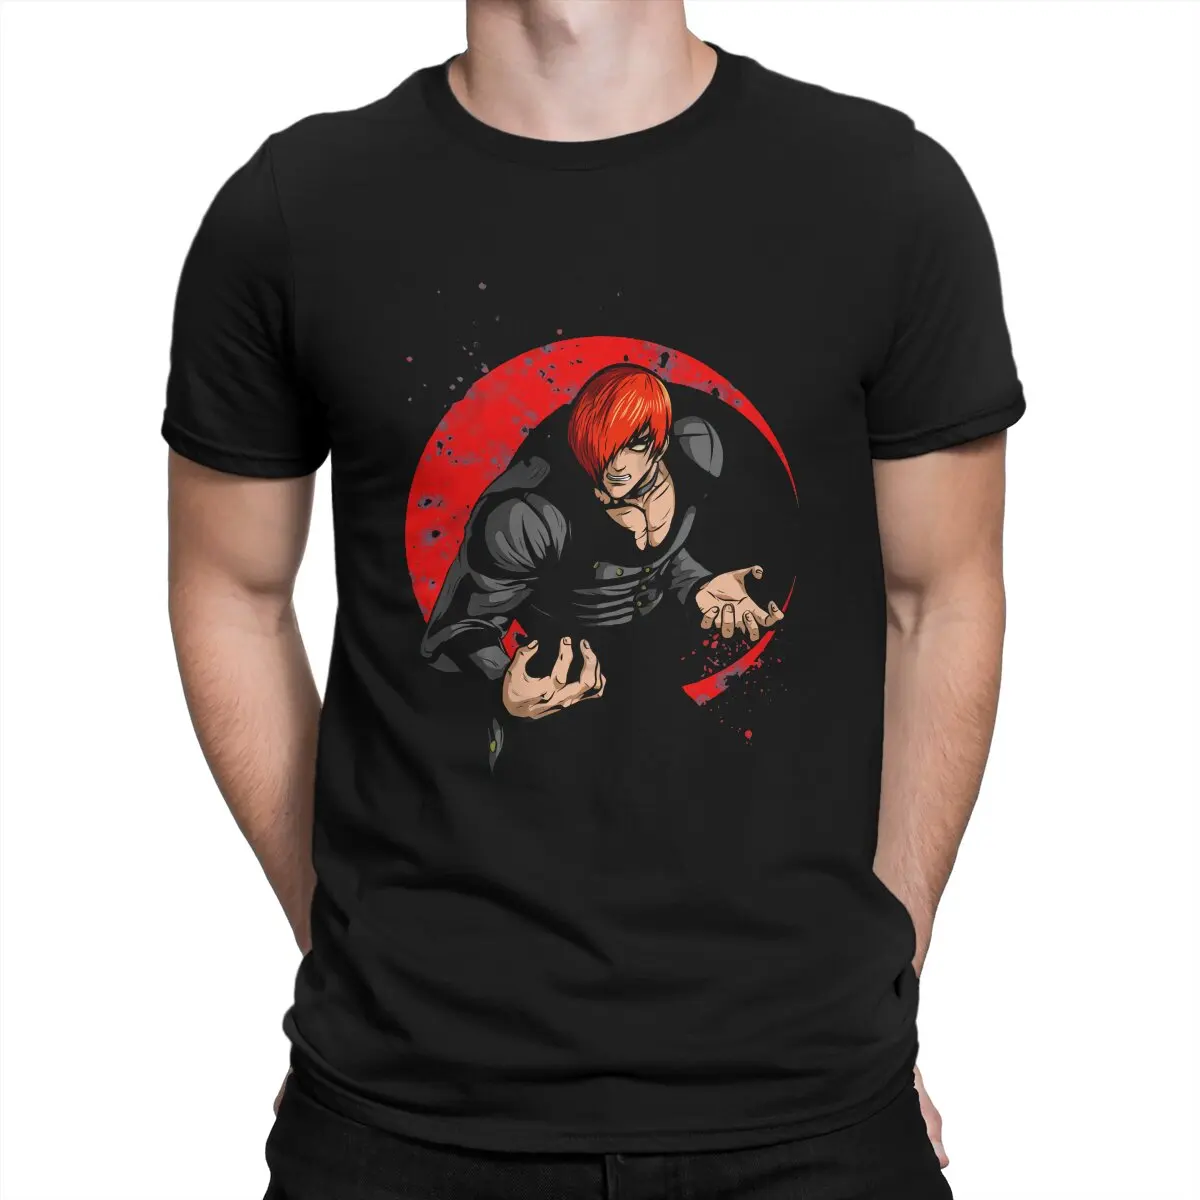 

Iori Yagami Unique TShirt The King of Fighters Game Casual T Shirt Newest Stuff For Men Women